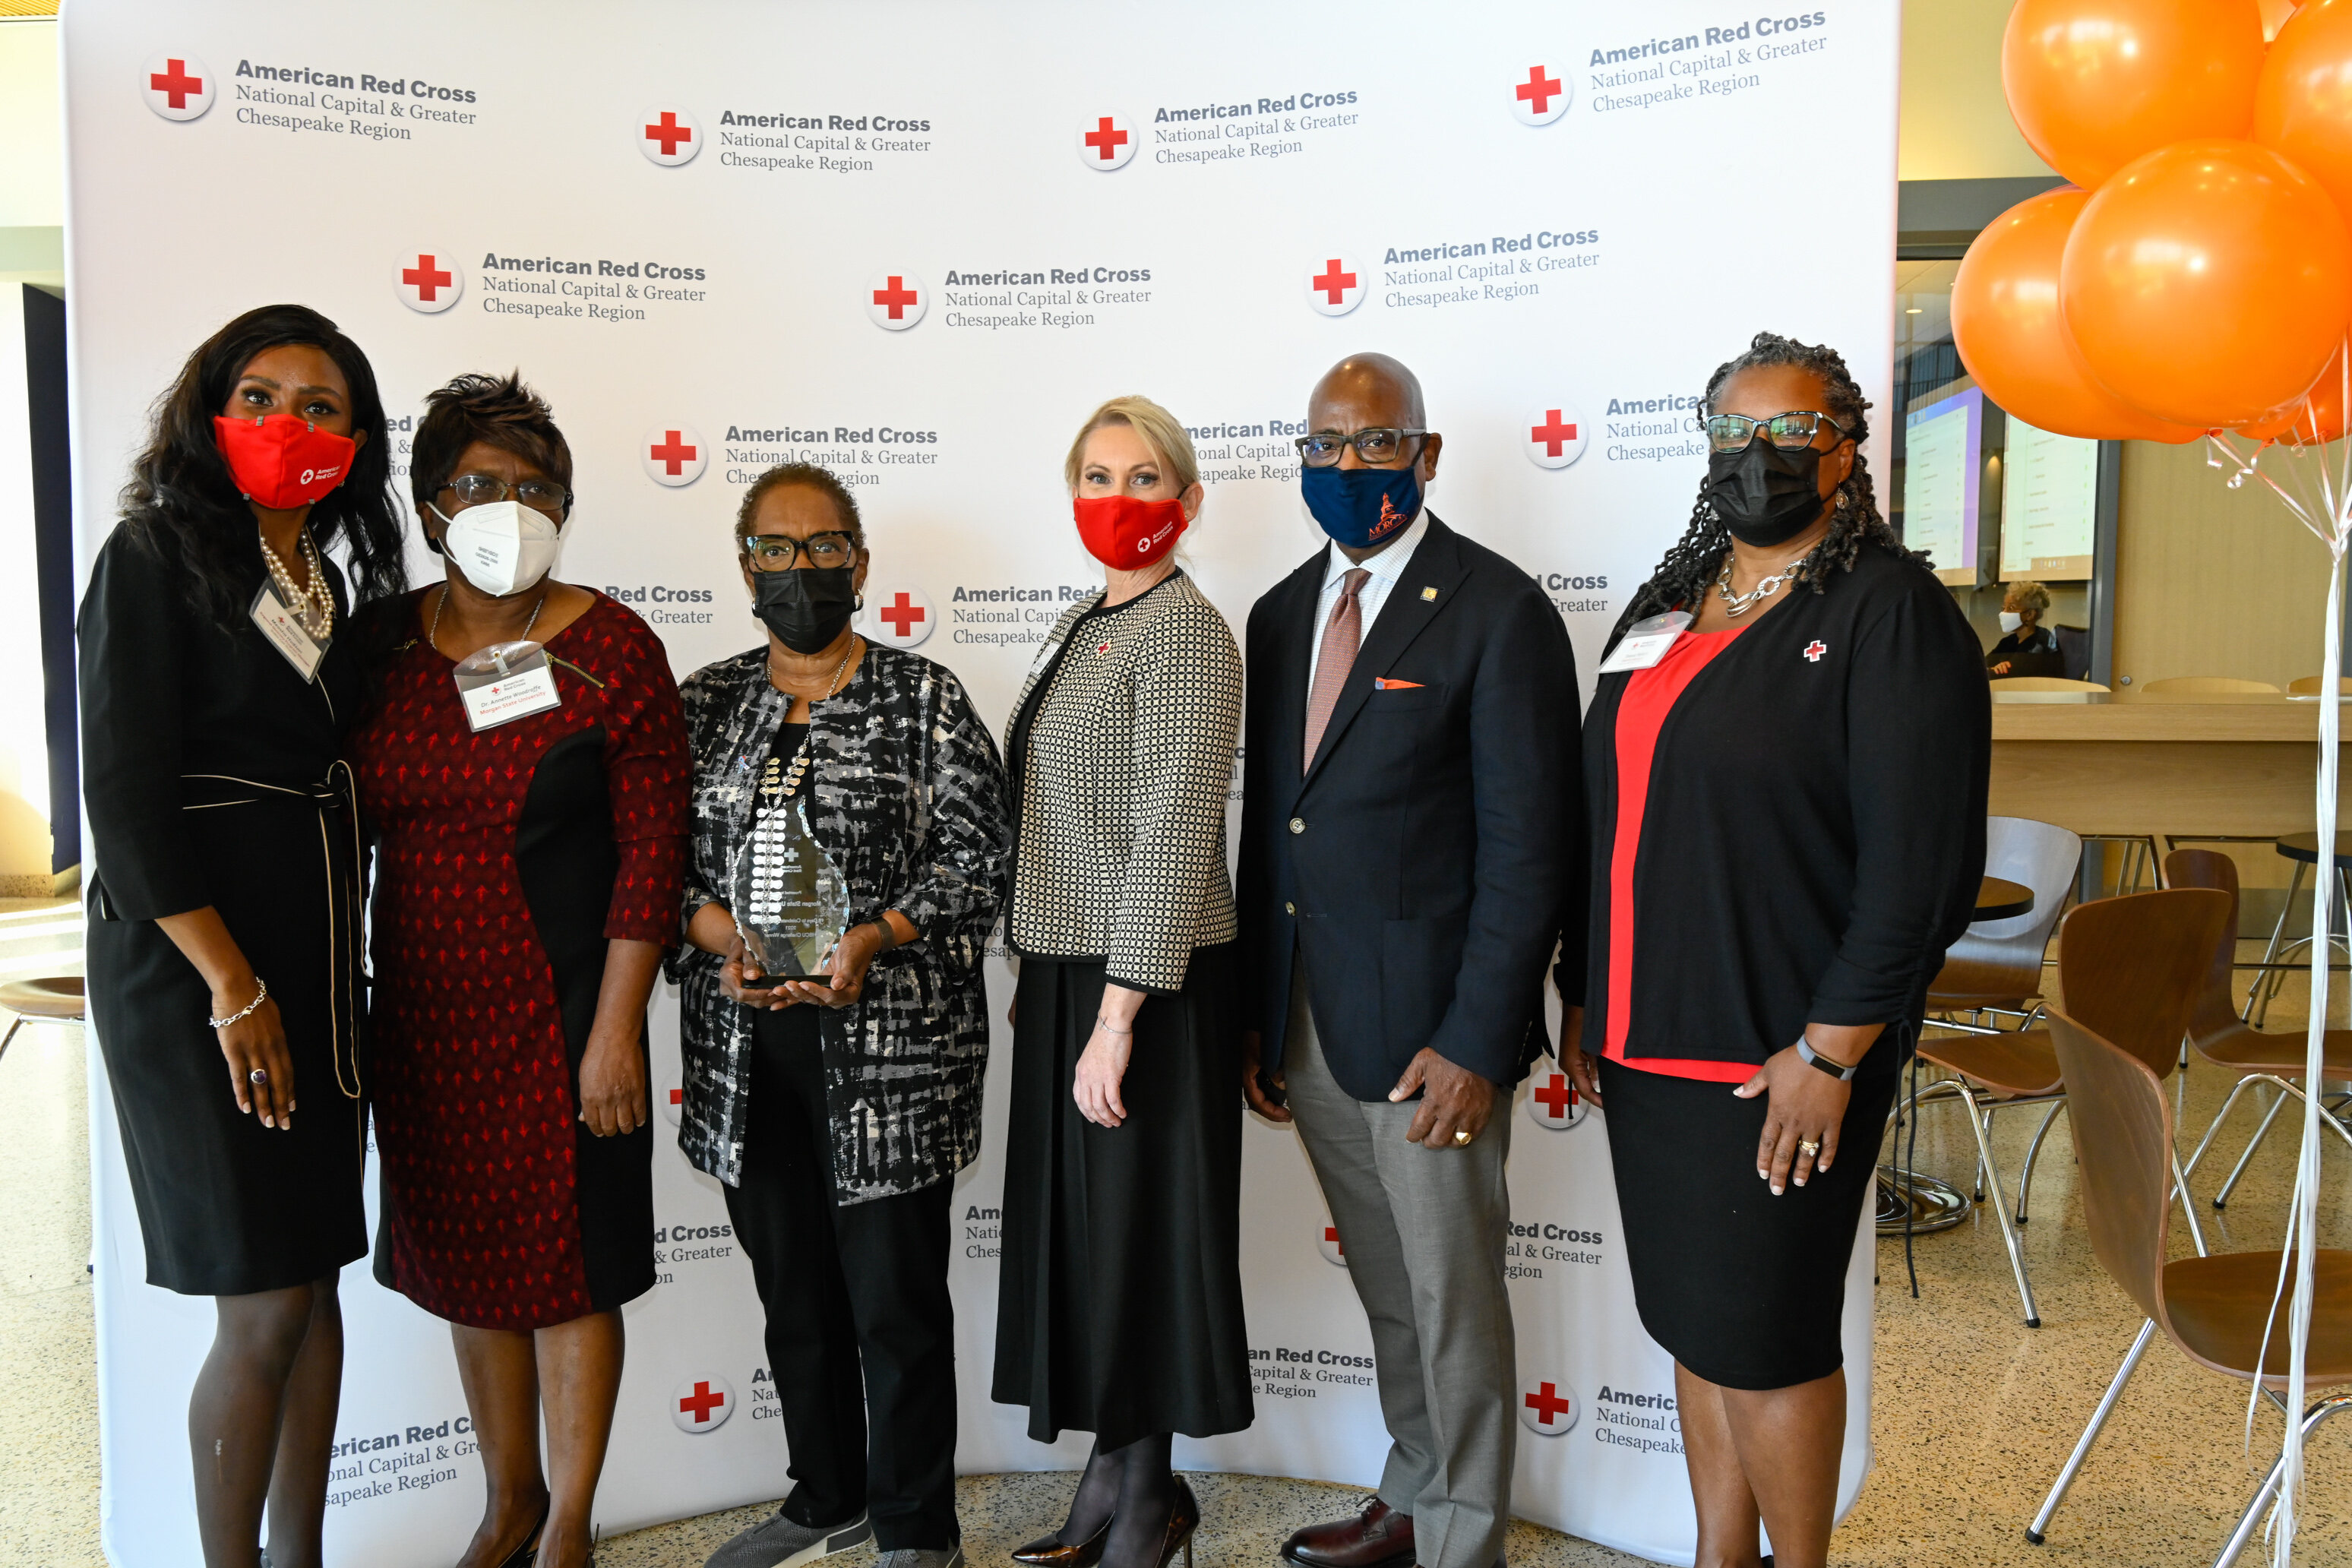 American Red Cross Blood Drive Award with five people